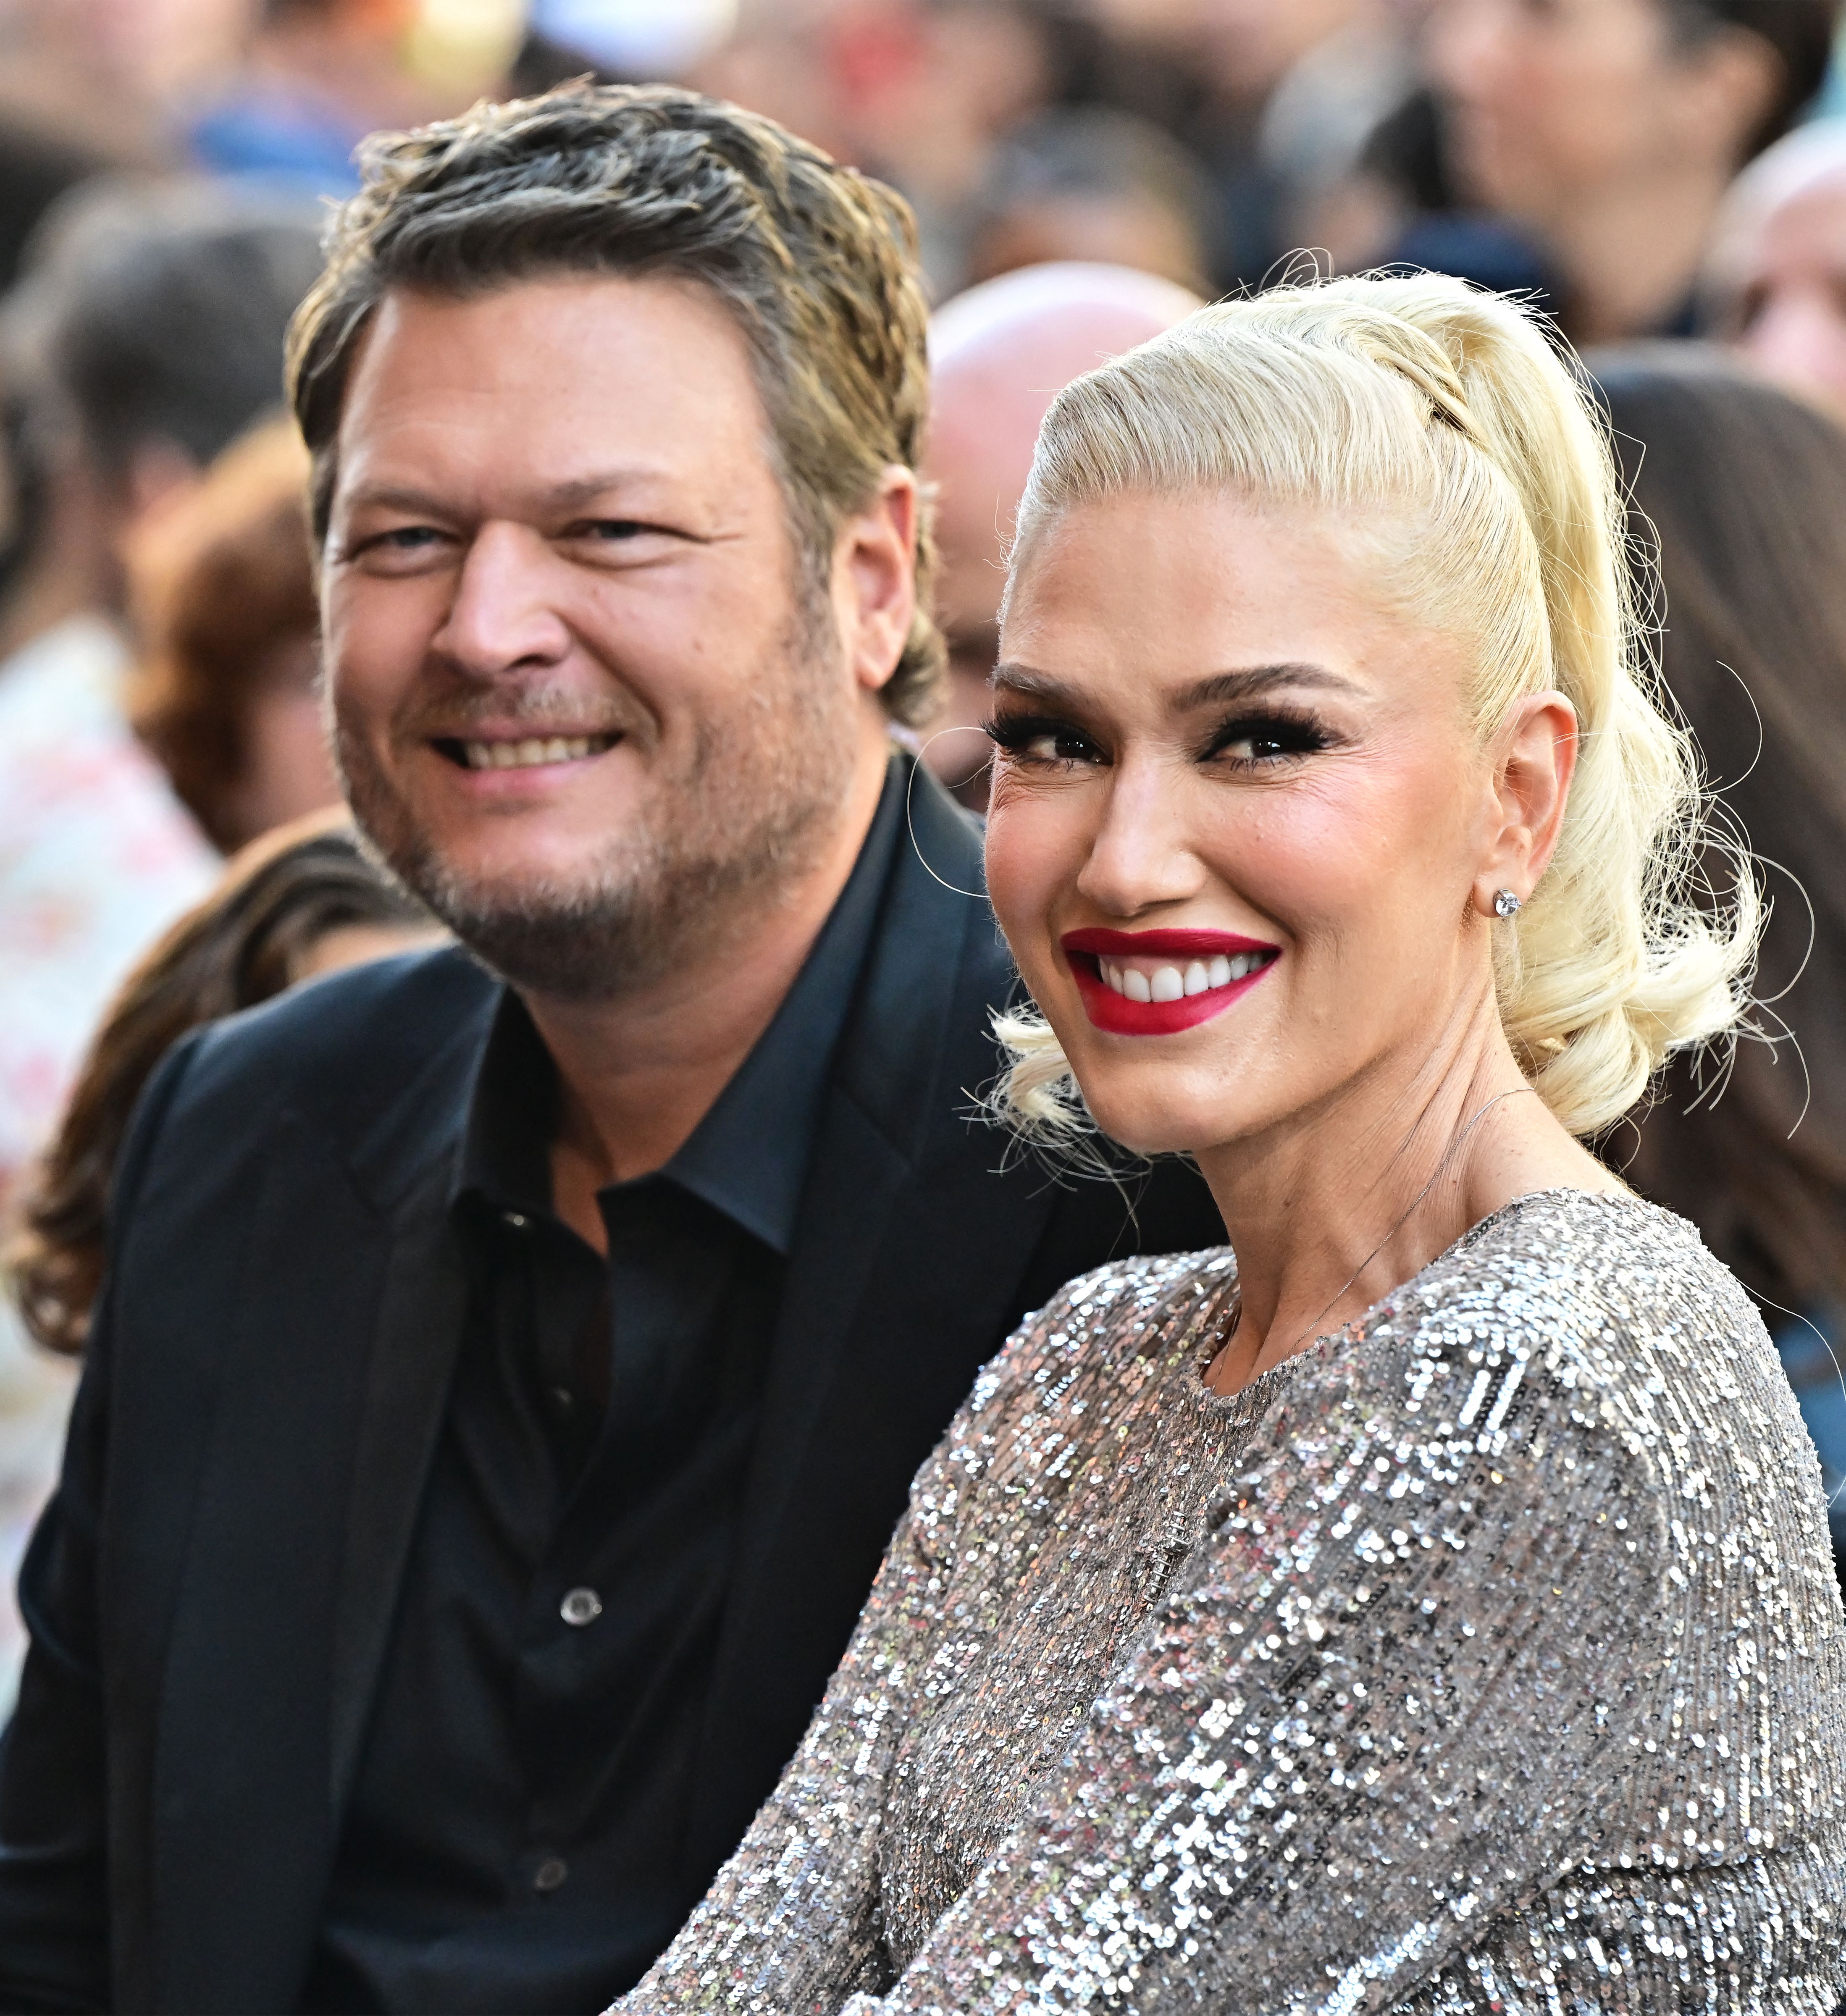 Blake and Gwen will be spending NYE on opposite sides of the country